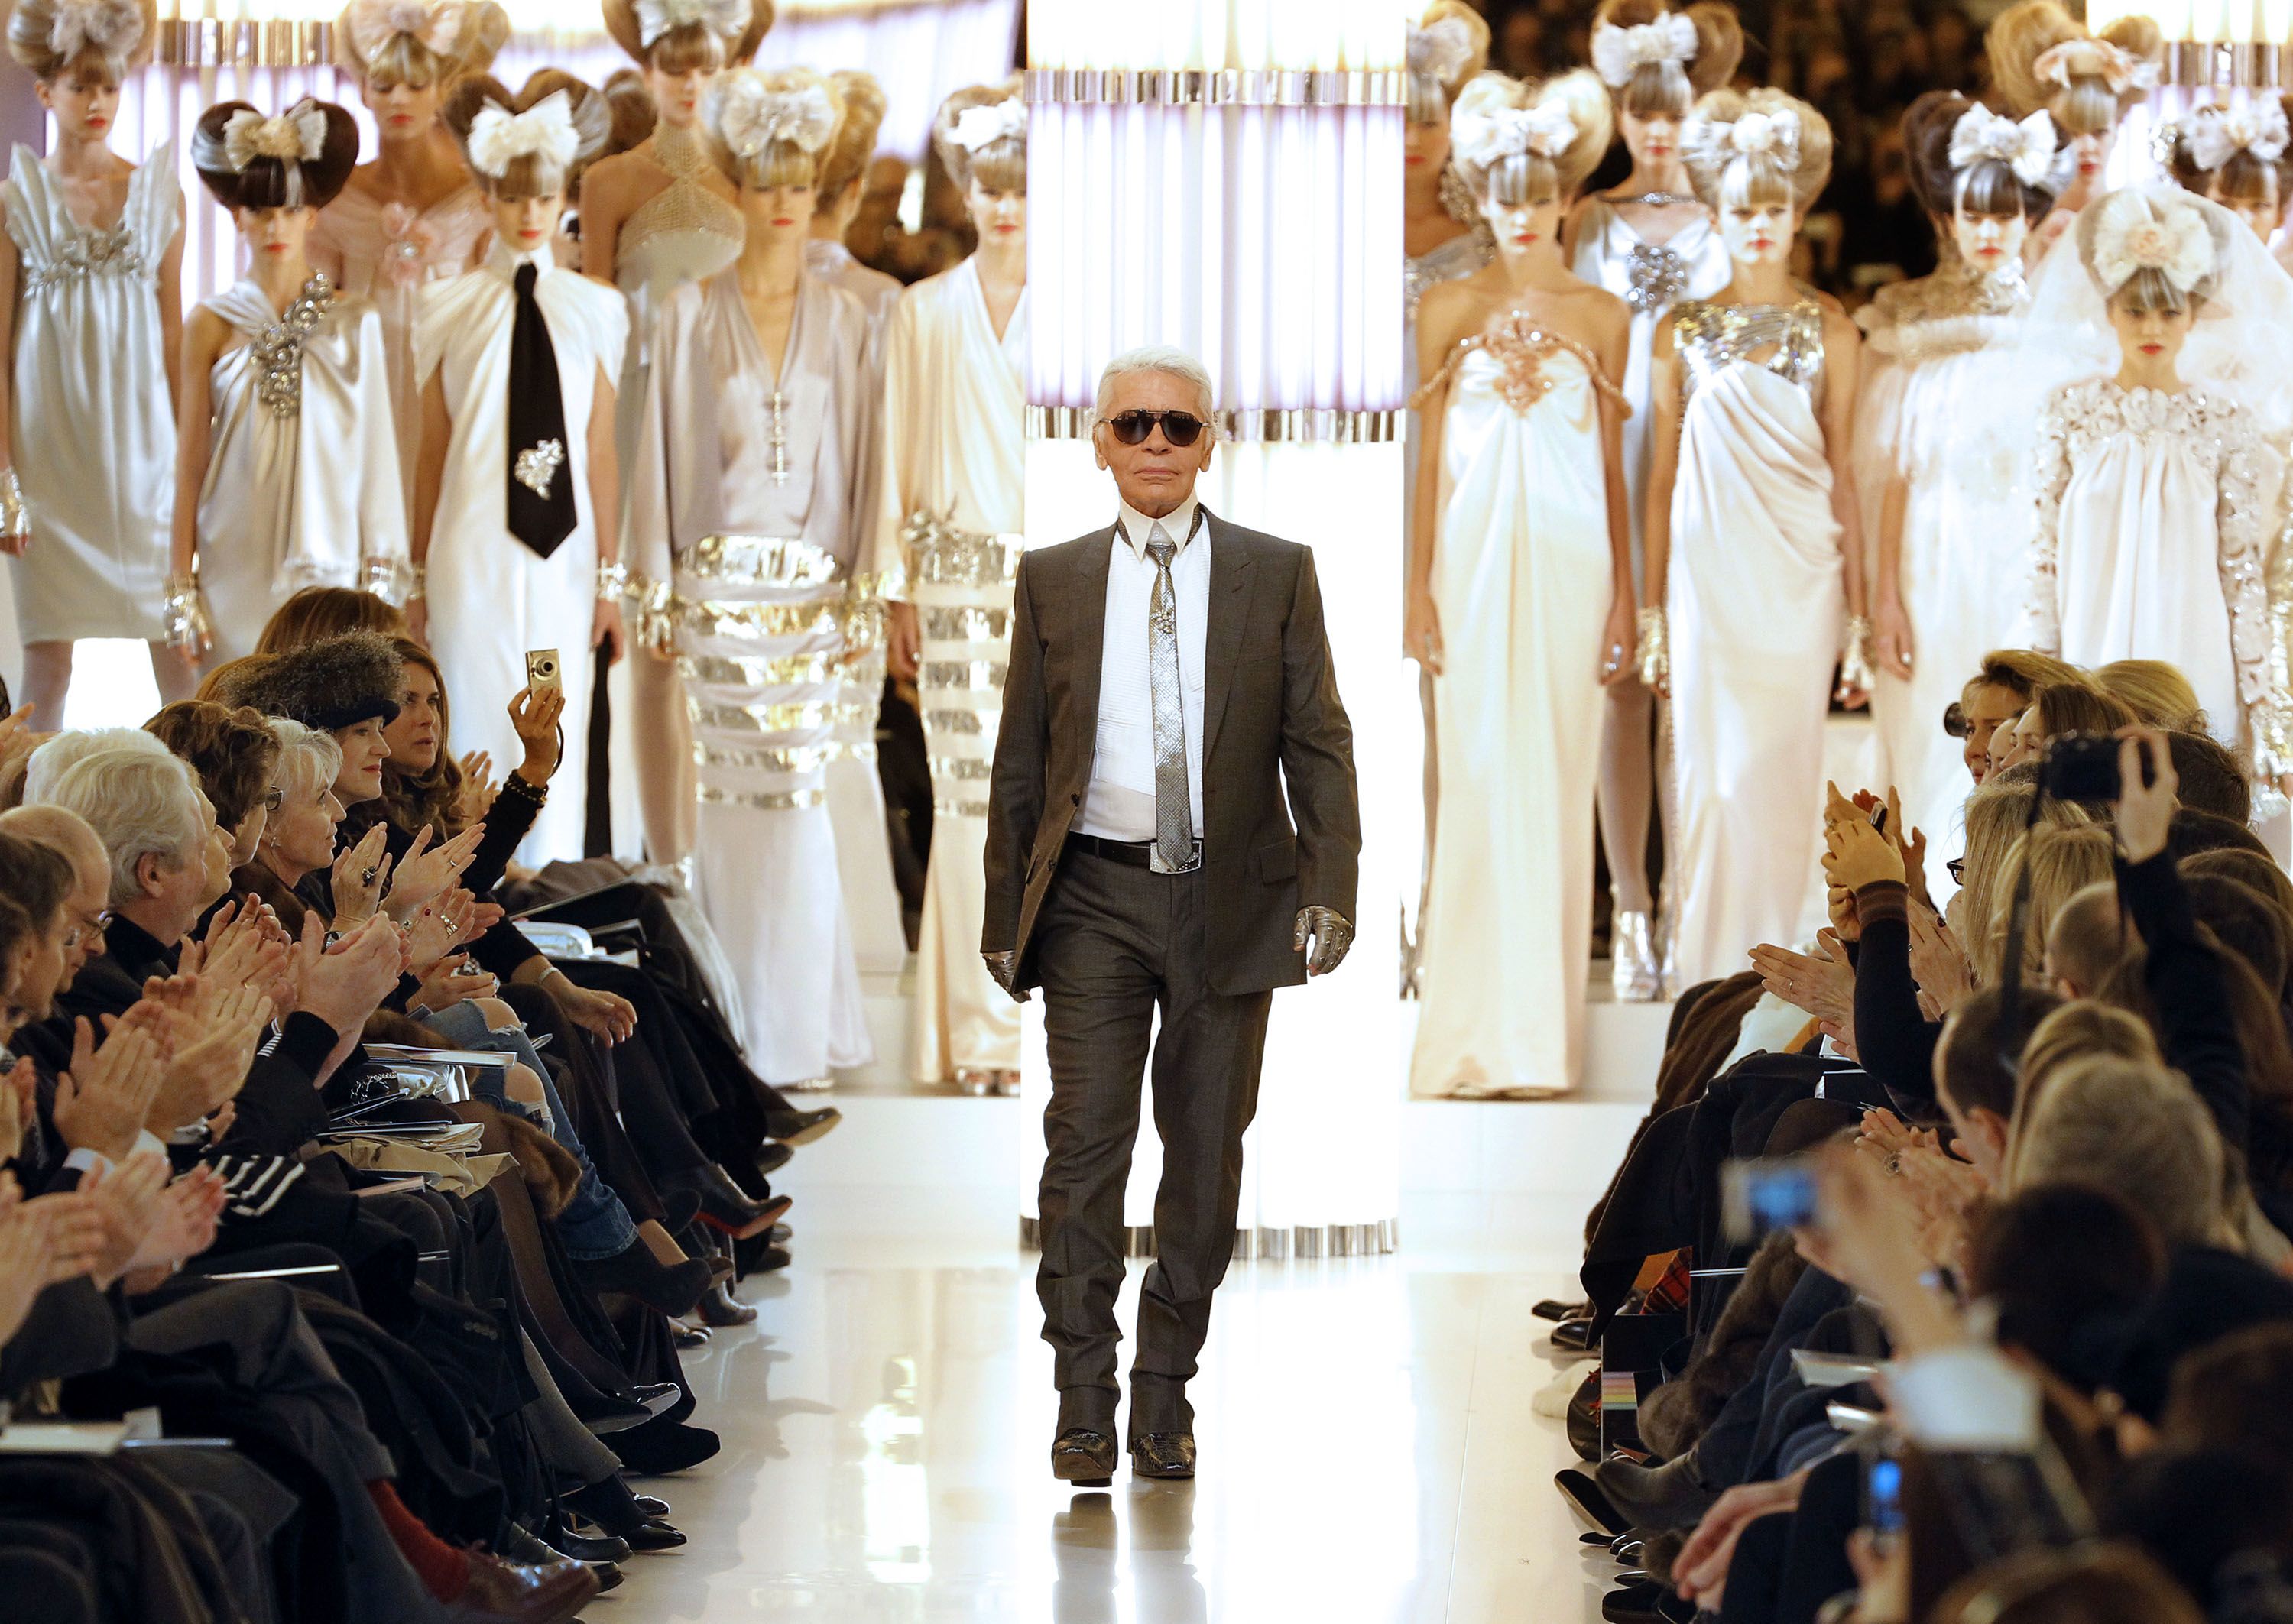 The great Karl Lagerfeld once quipped that “sweatpants are a sign